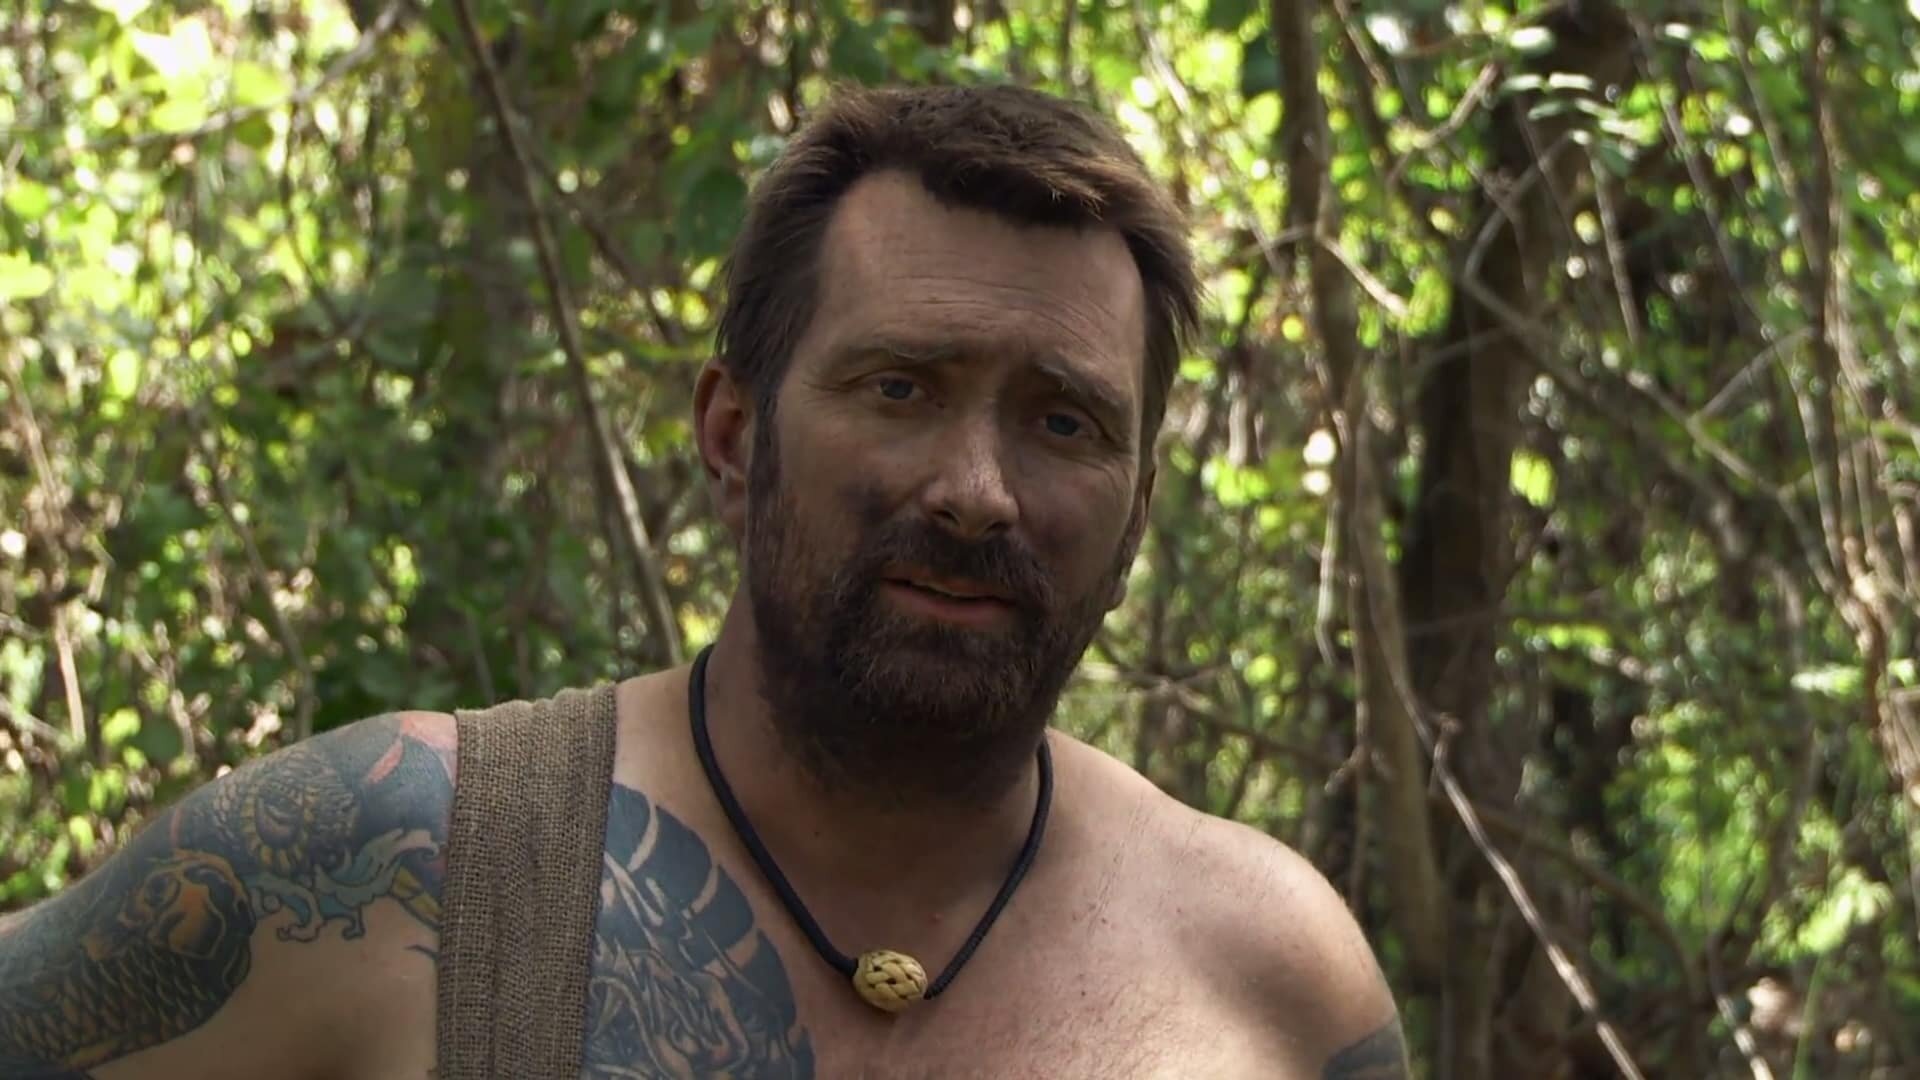 Naked And Afraid S7E9 Curse of the Swamp: Part 2